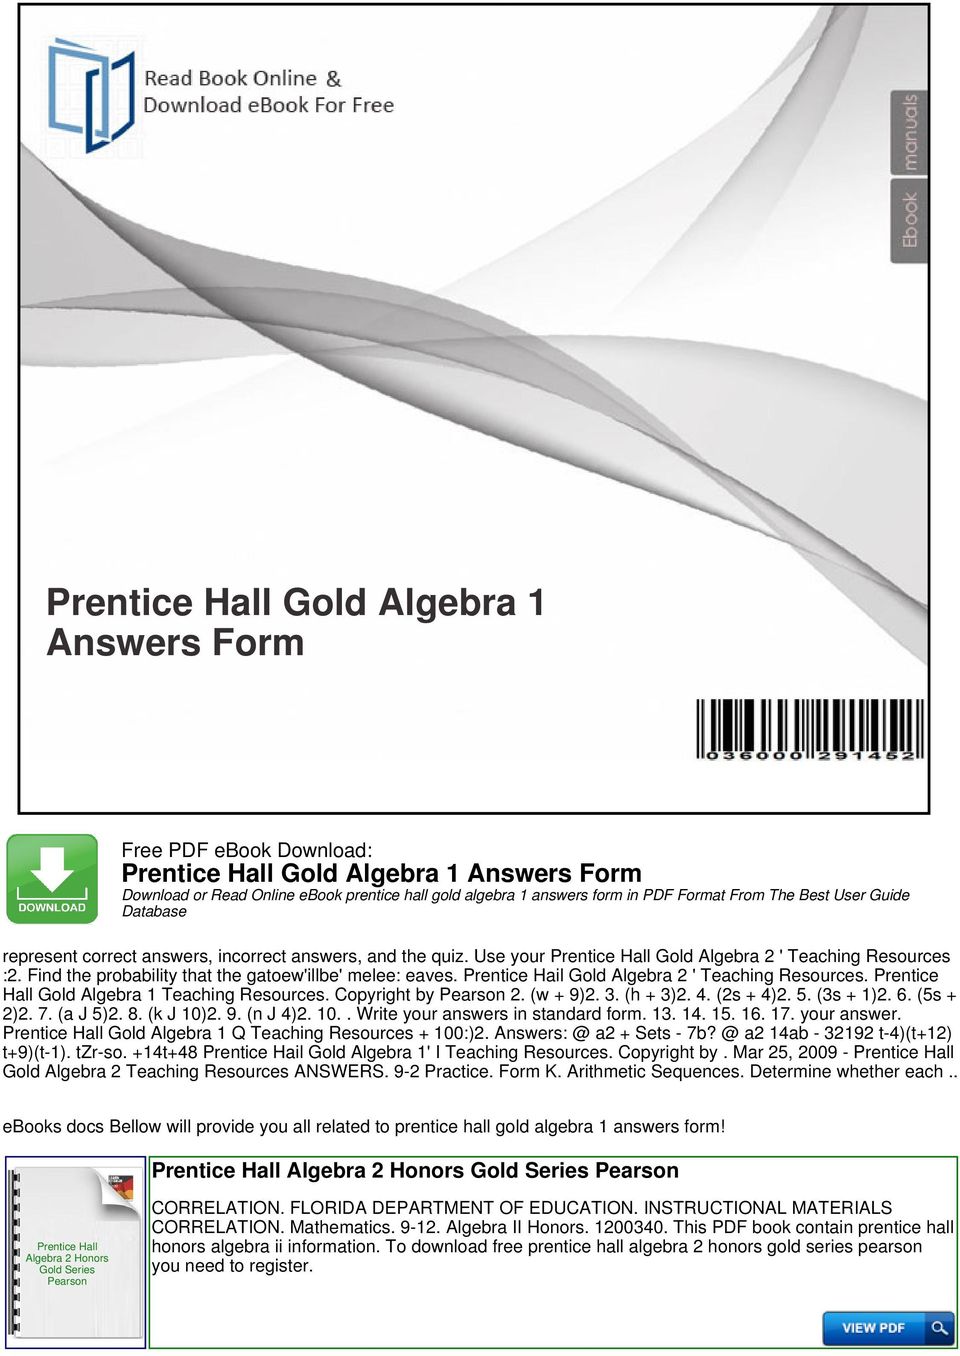 Prentice Hail Gold Algebra 2 ' Teaching Resources. Prentice Hall Gold Algebra 1 Teaching Resources. Copyright by 2. (w + 9)2. 3. (h + 3)2. 4. (2s + 4)2. 5. (3s + 1)2. 6. (5s + 2)2. 7. (a J 5)2. 8.